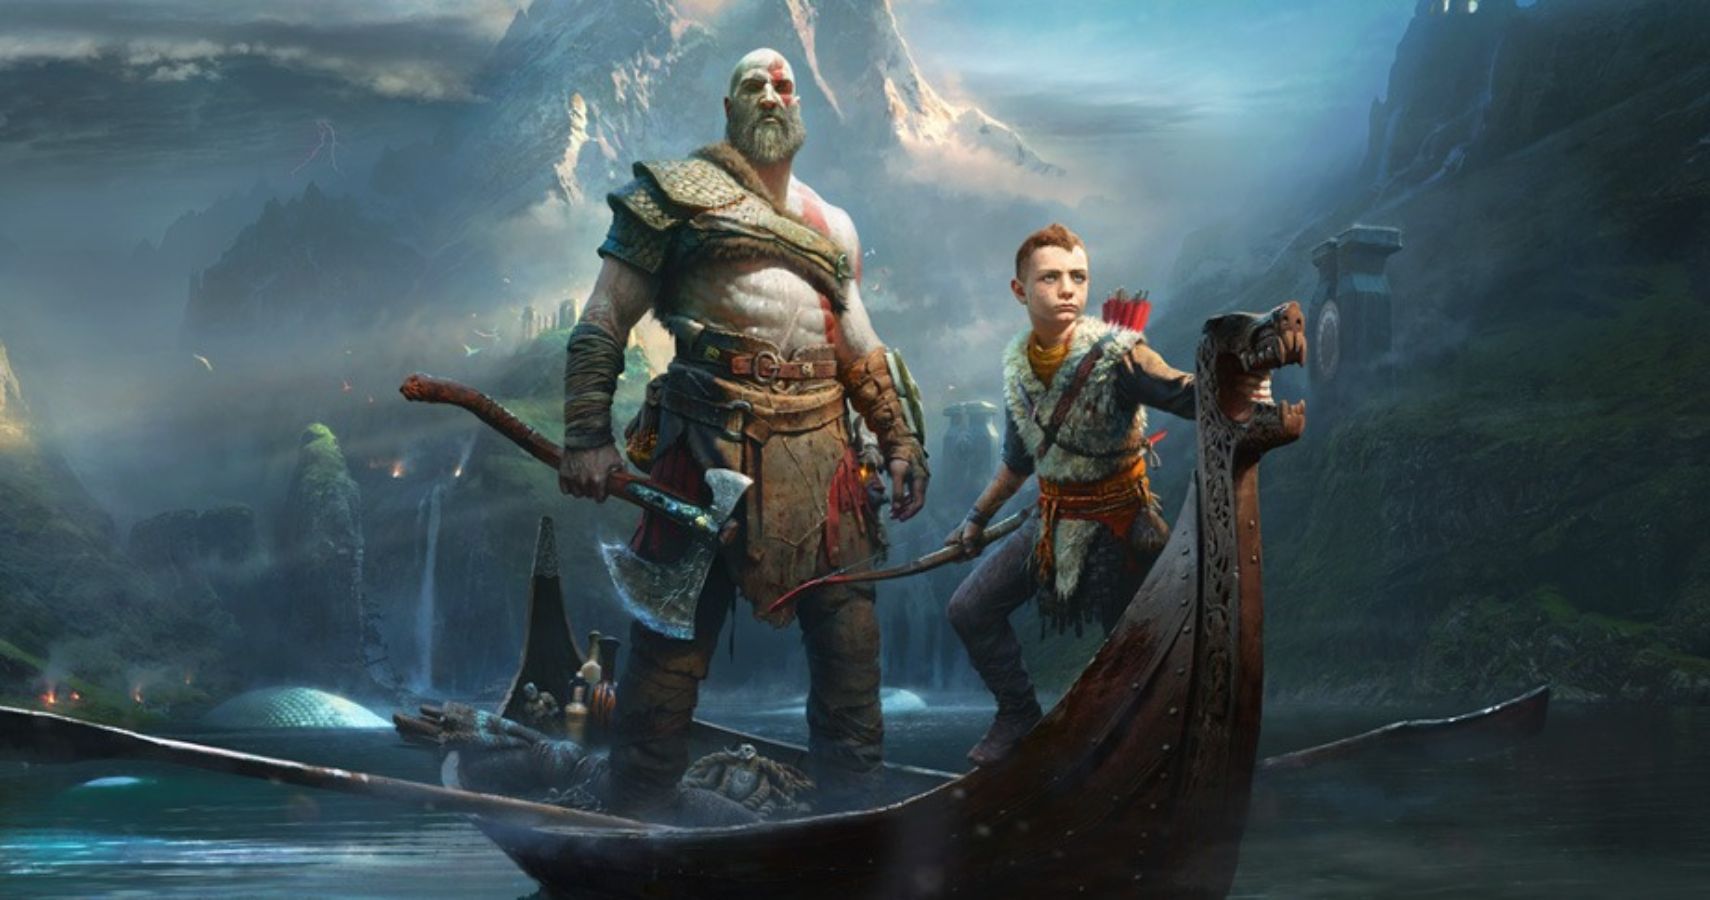 Kratos, a large warrior, stands in a boat with a young warrior boy.